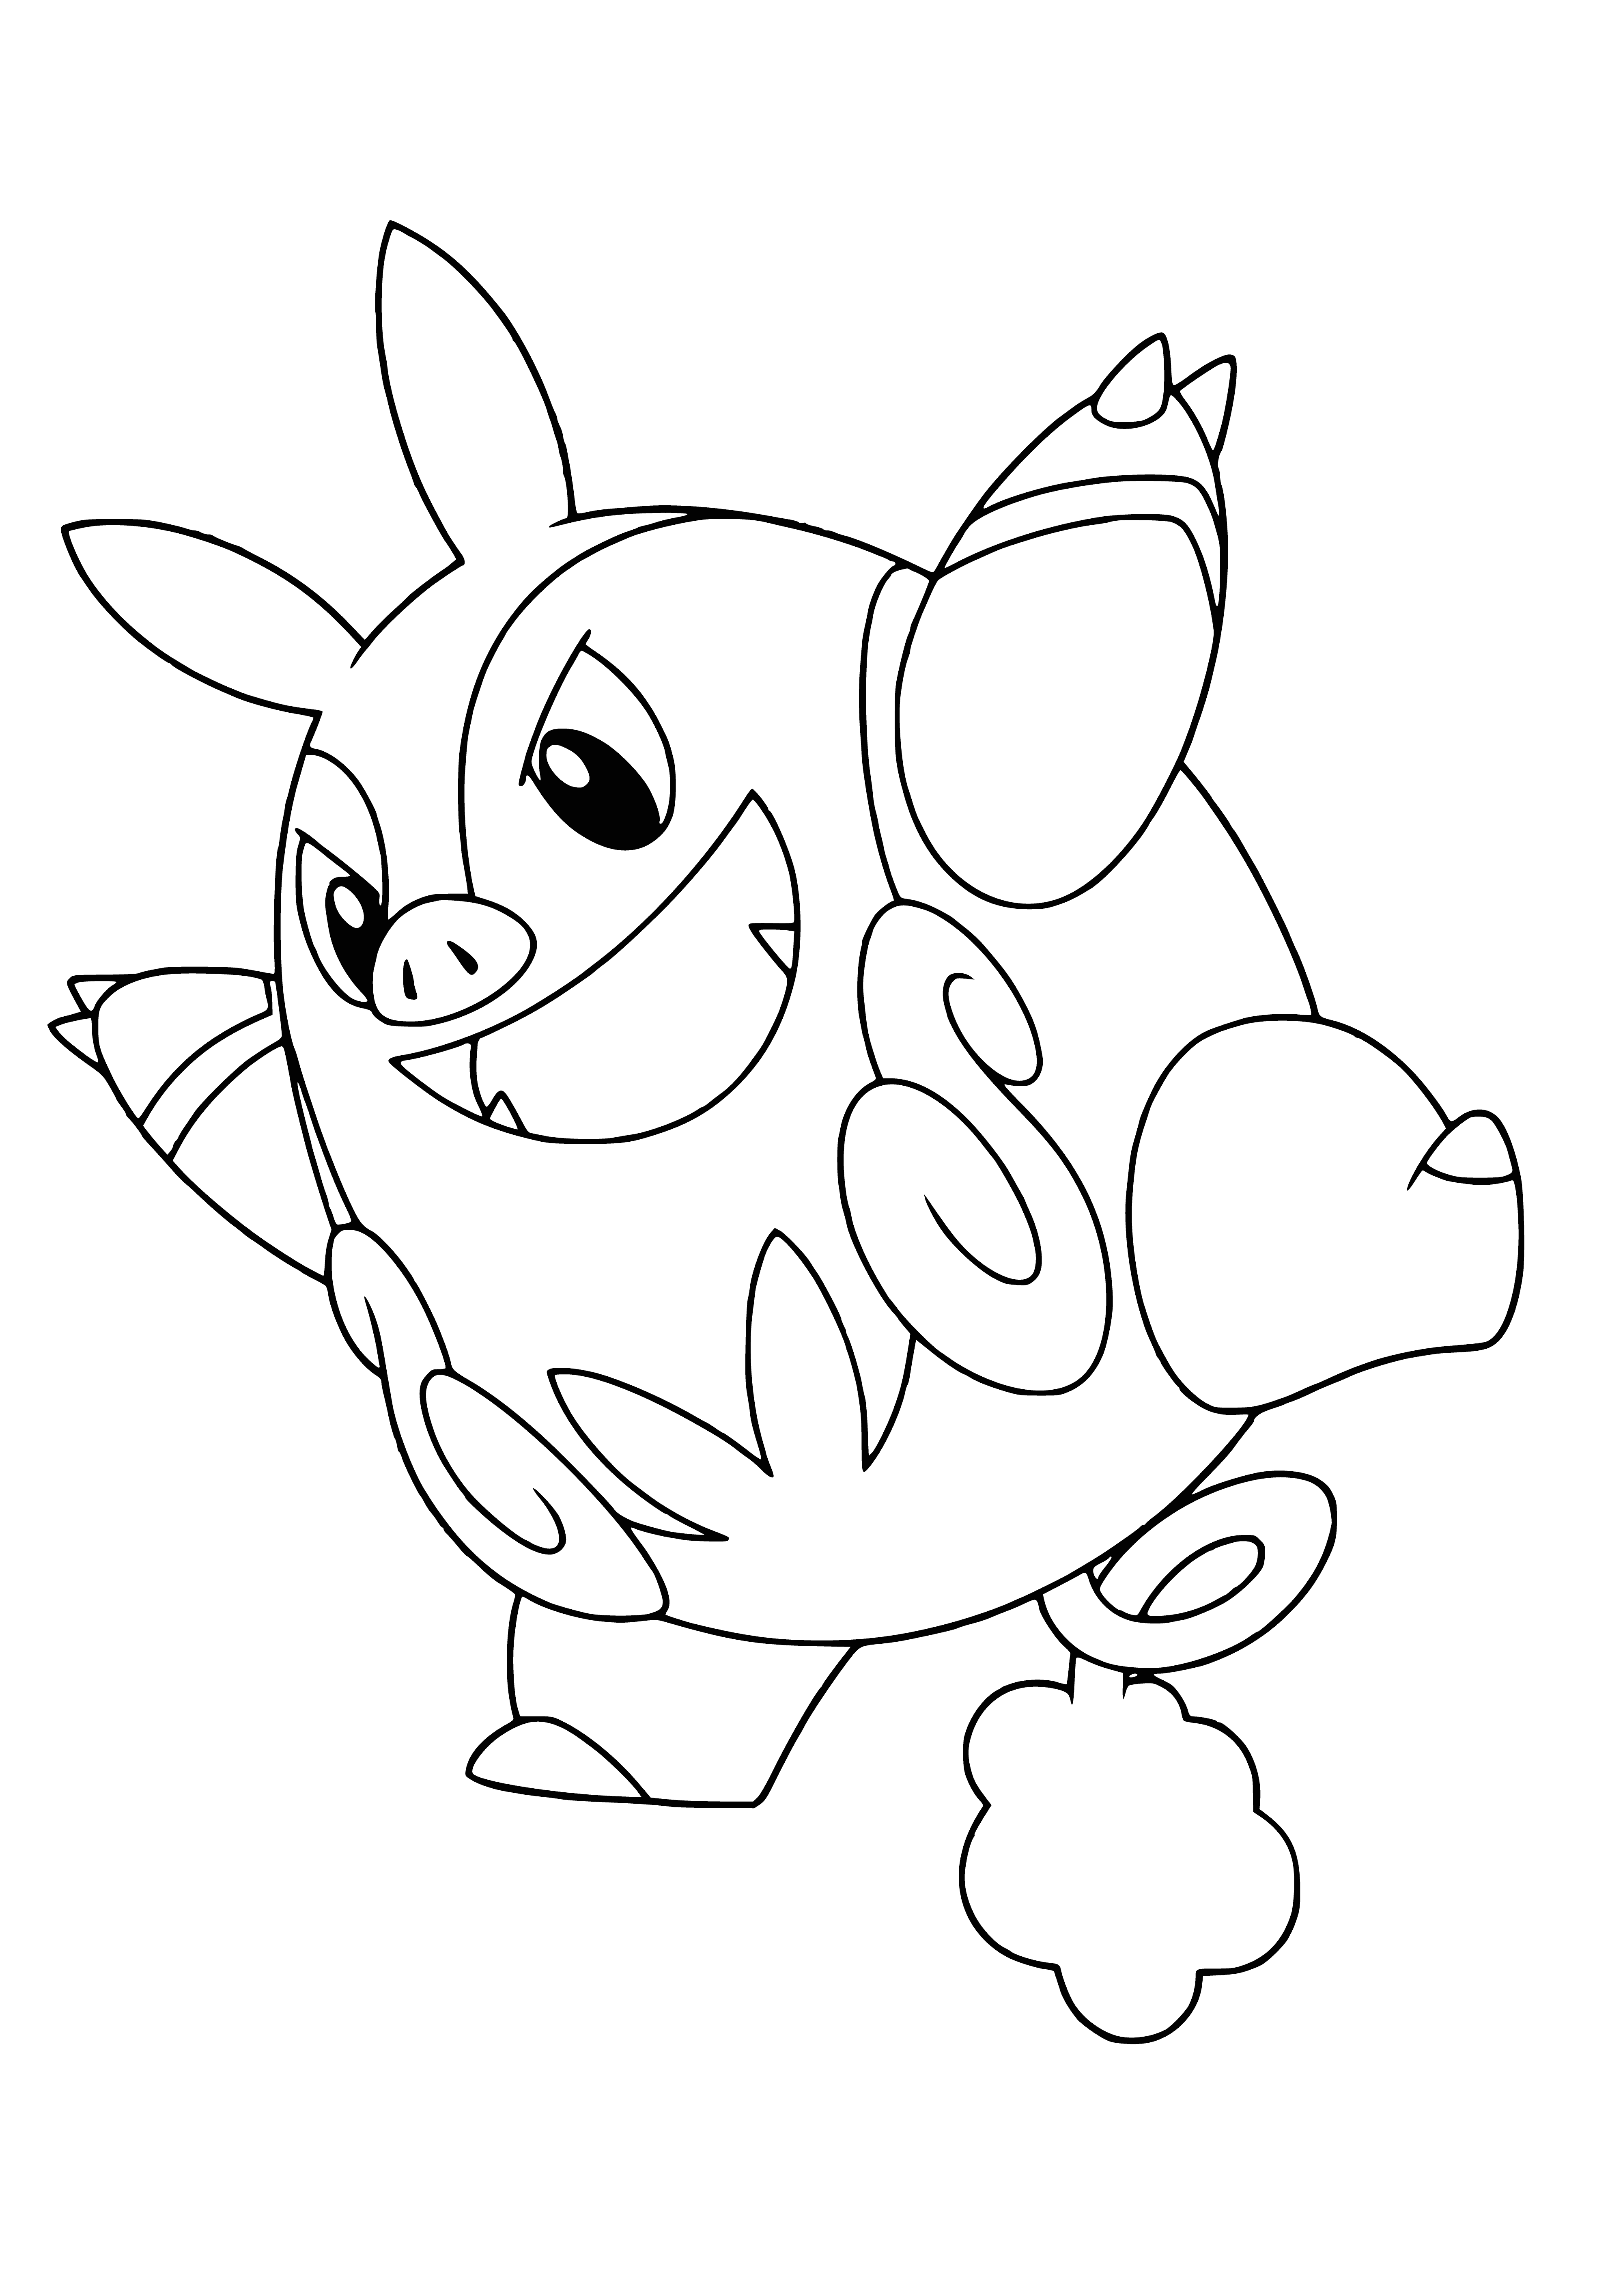 coloring page: Pig Pokémon w/ large, curved snout, small eyes, shaggy fur, 4 hooves, and small, curly tail.